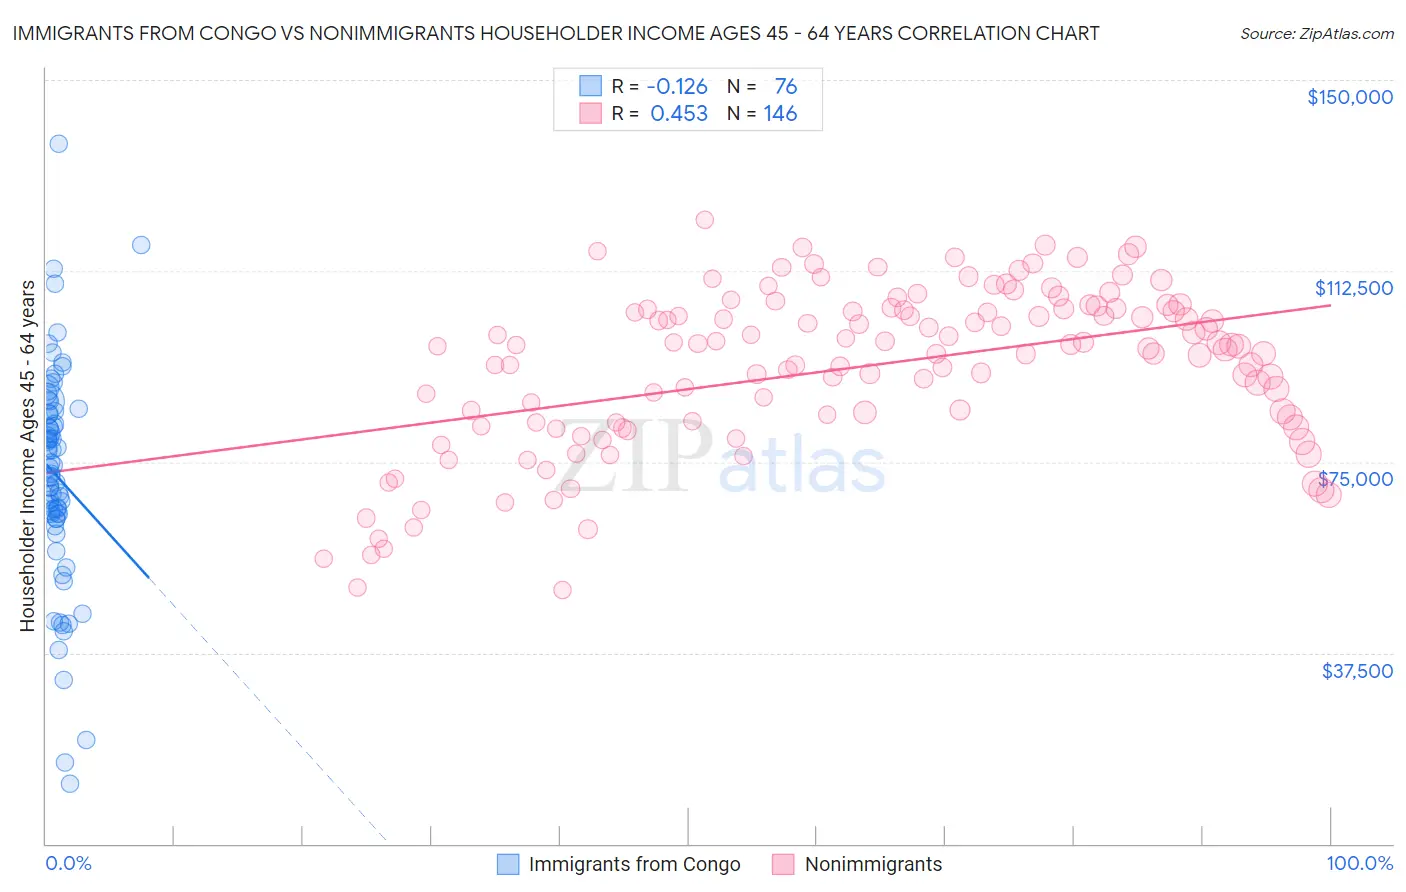 Immigrants from Congo vs Nonimmigrants Householder Income Ages 45 - 64 years